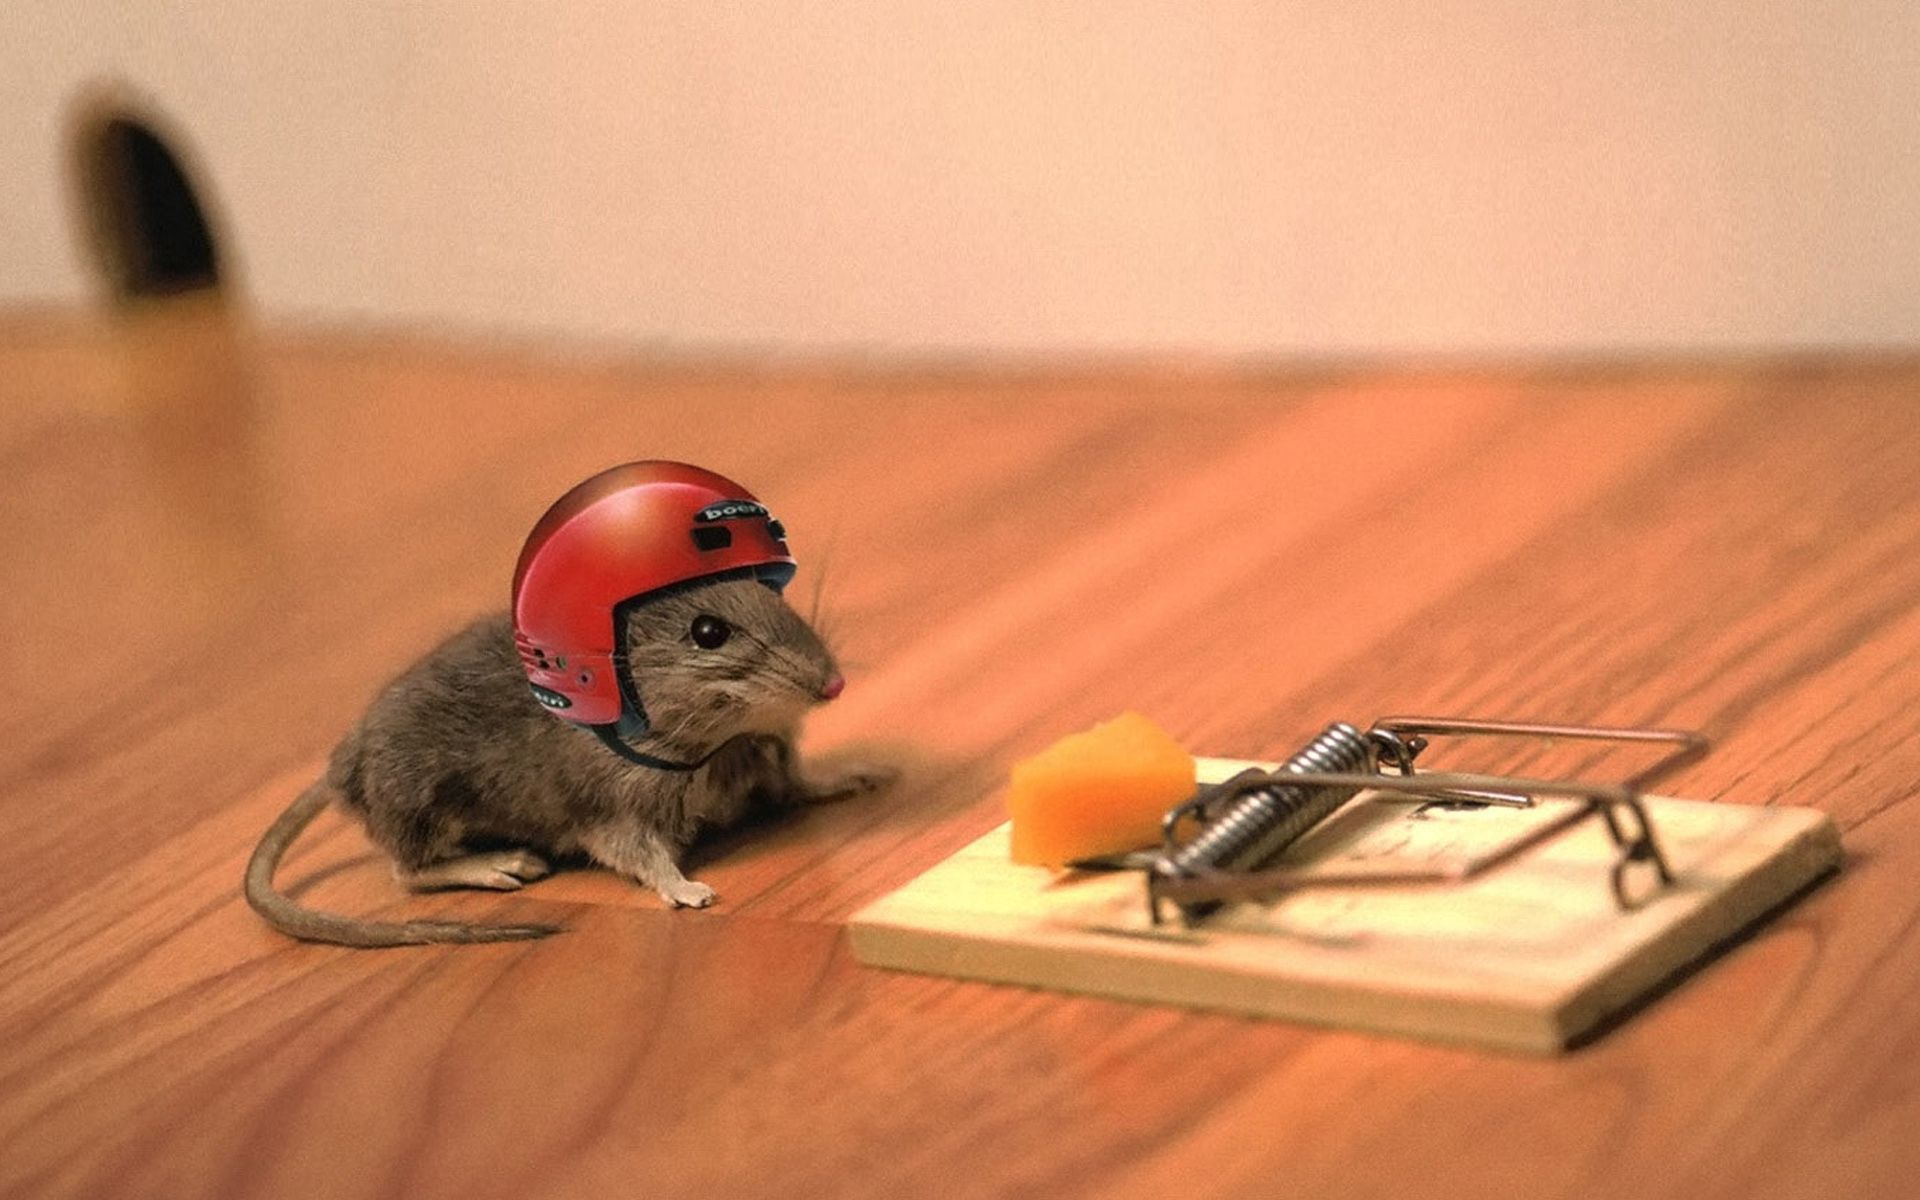 animals, cheese, helmet, mouse, situation, joke, mousetrap High Definition image